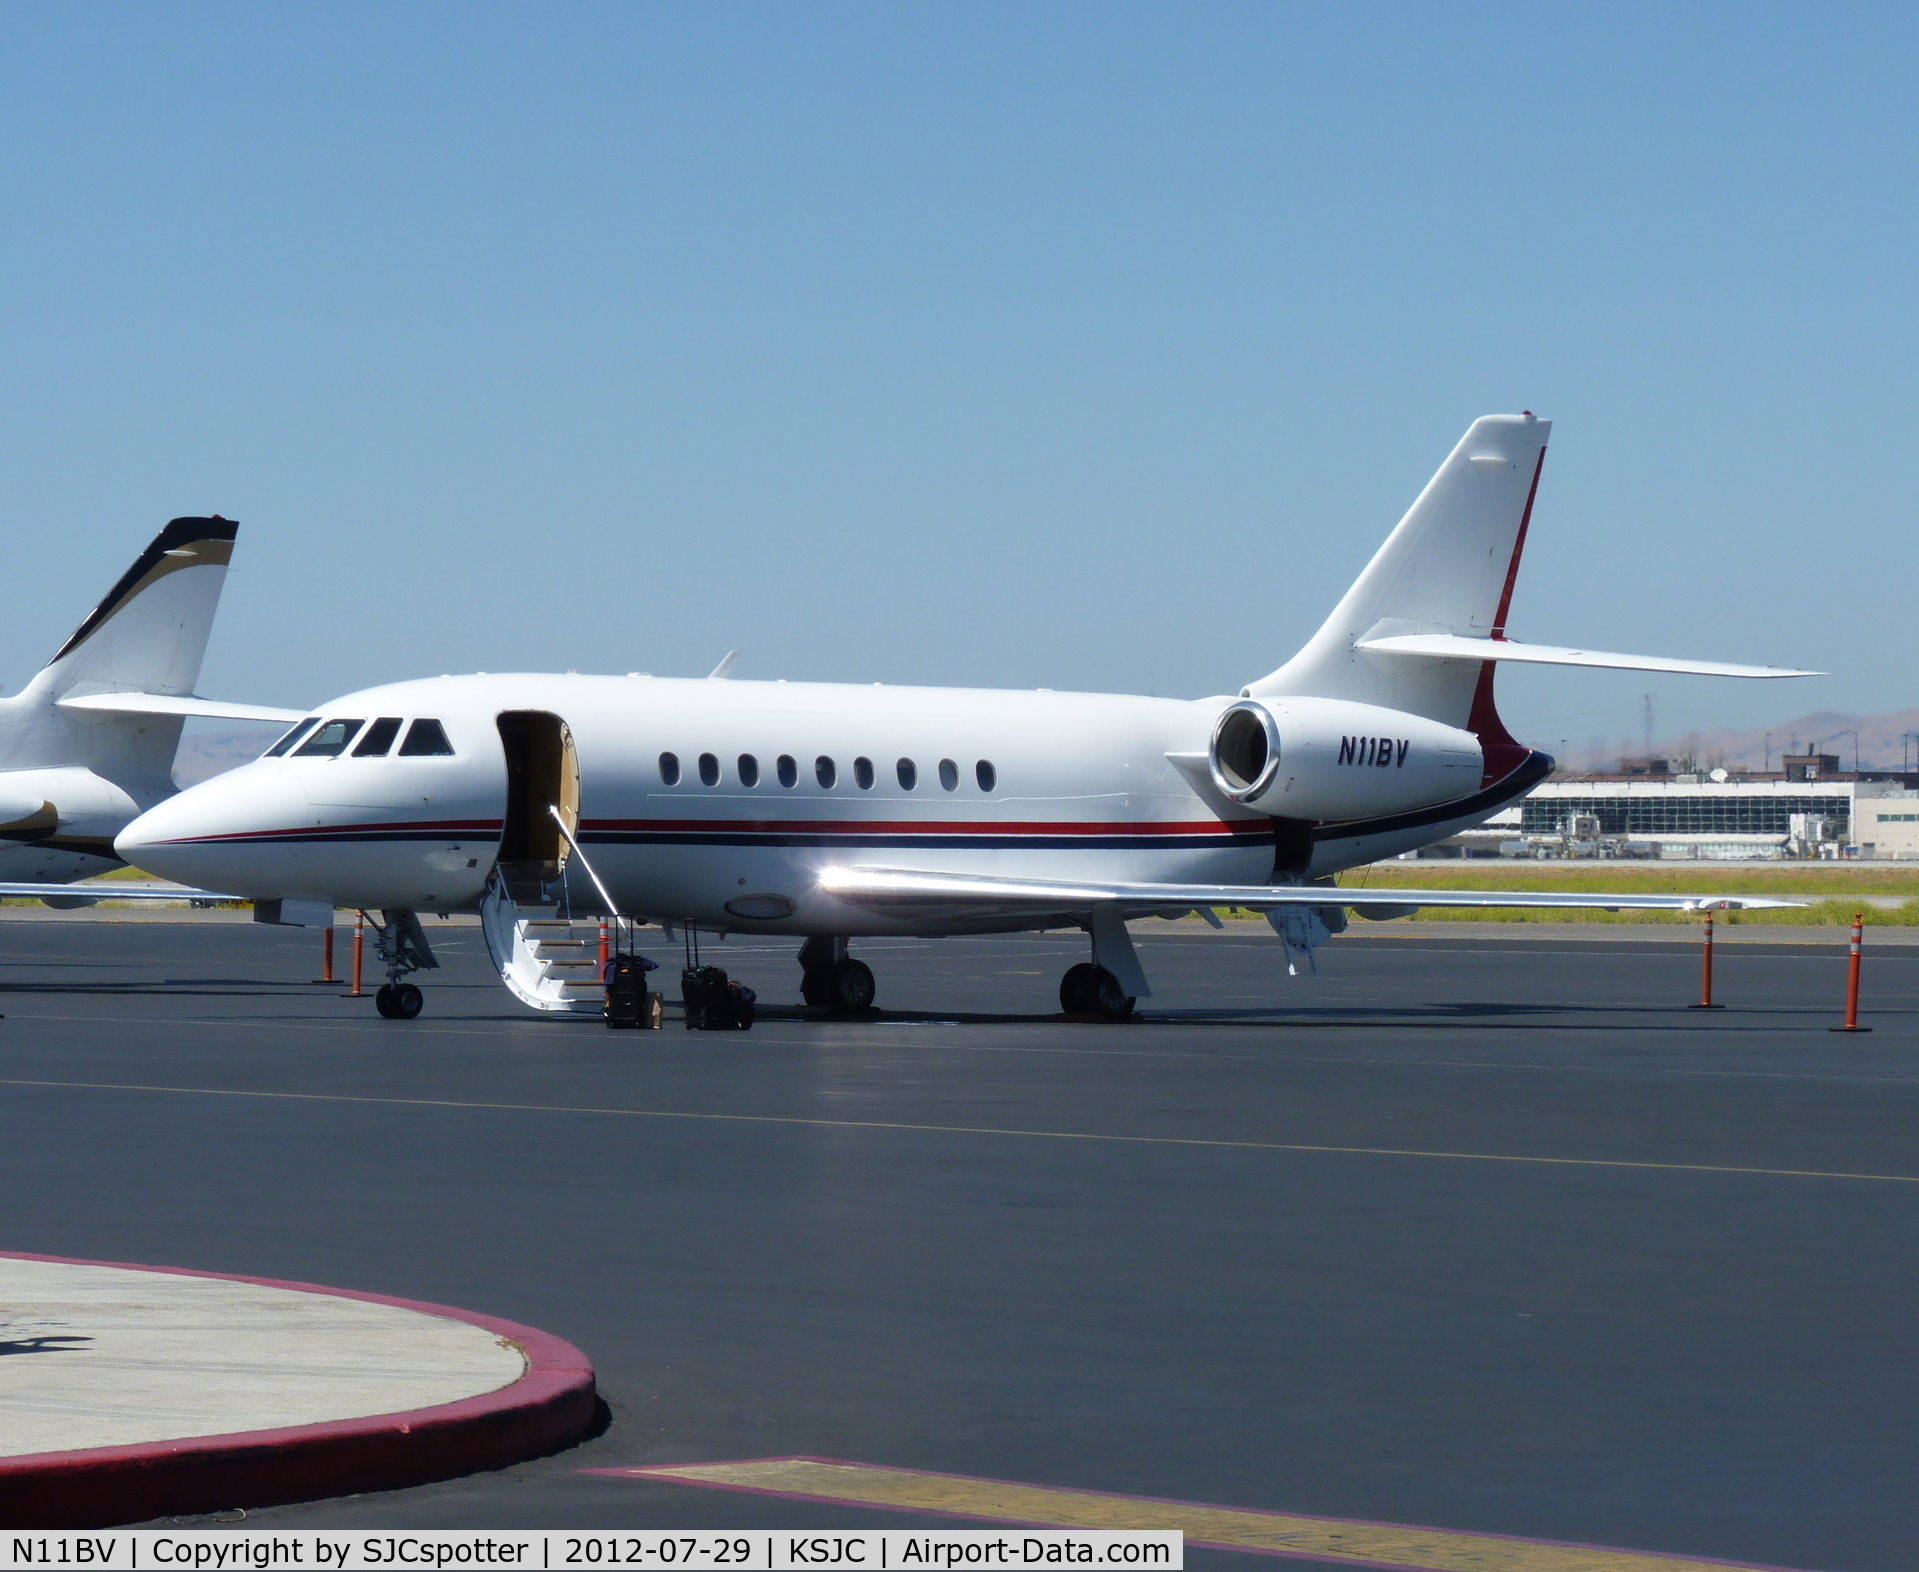 N11BV, 1995 Dassault Falcon 2000 C/N 21, Unloading after arriving from KSAN.